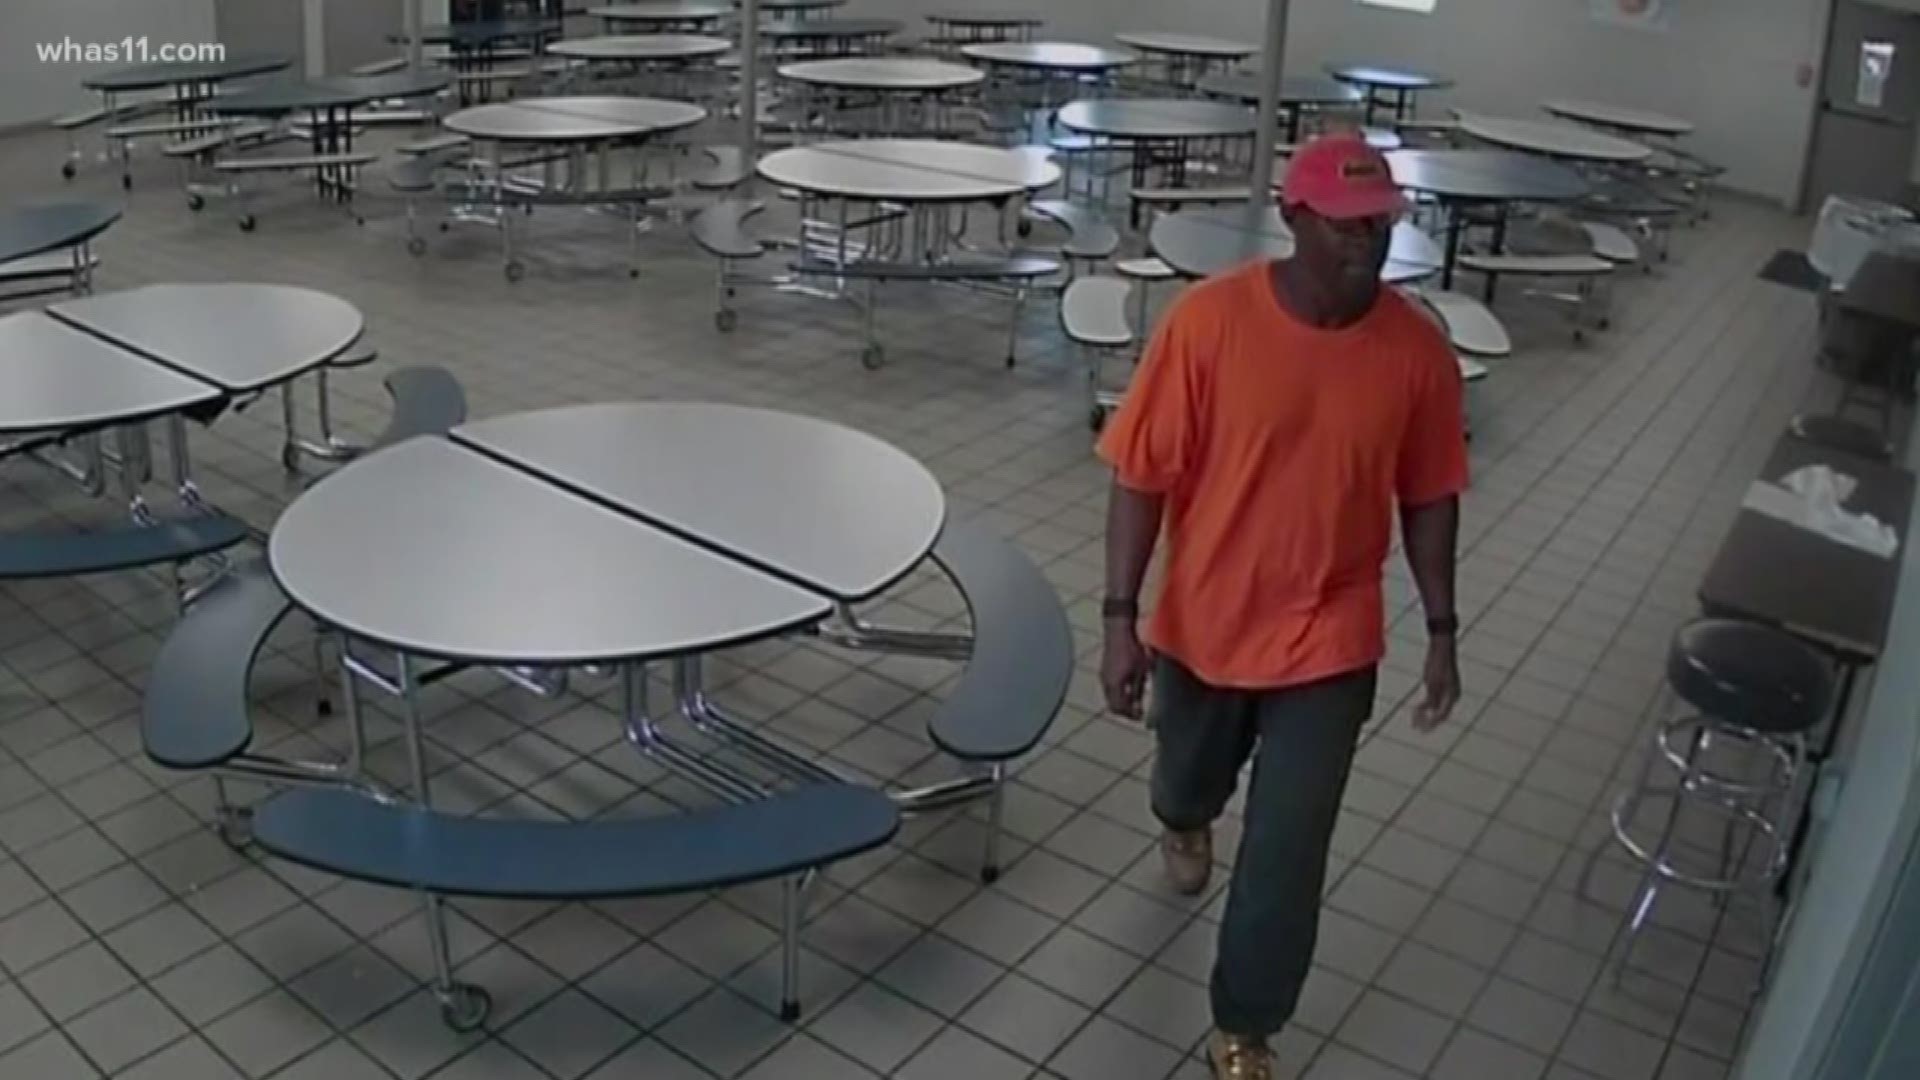 LMPD is searching for a man who stole money from Whitefield Academy